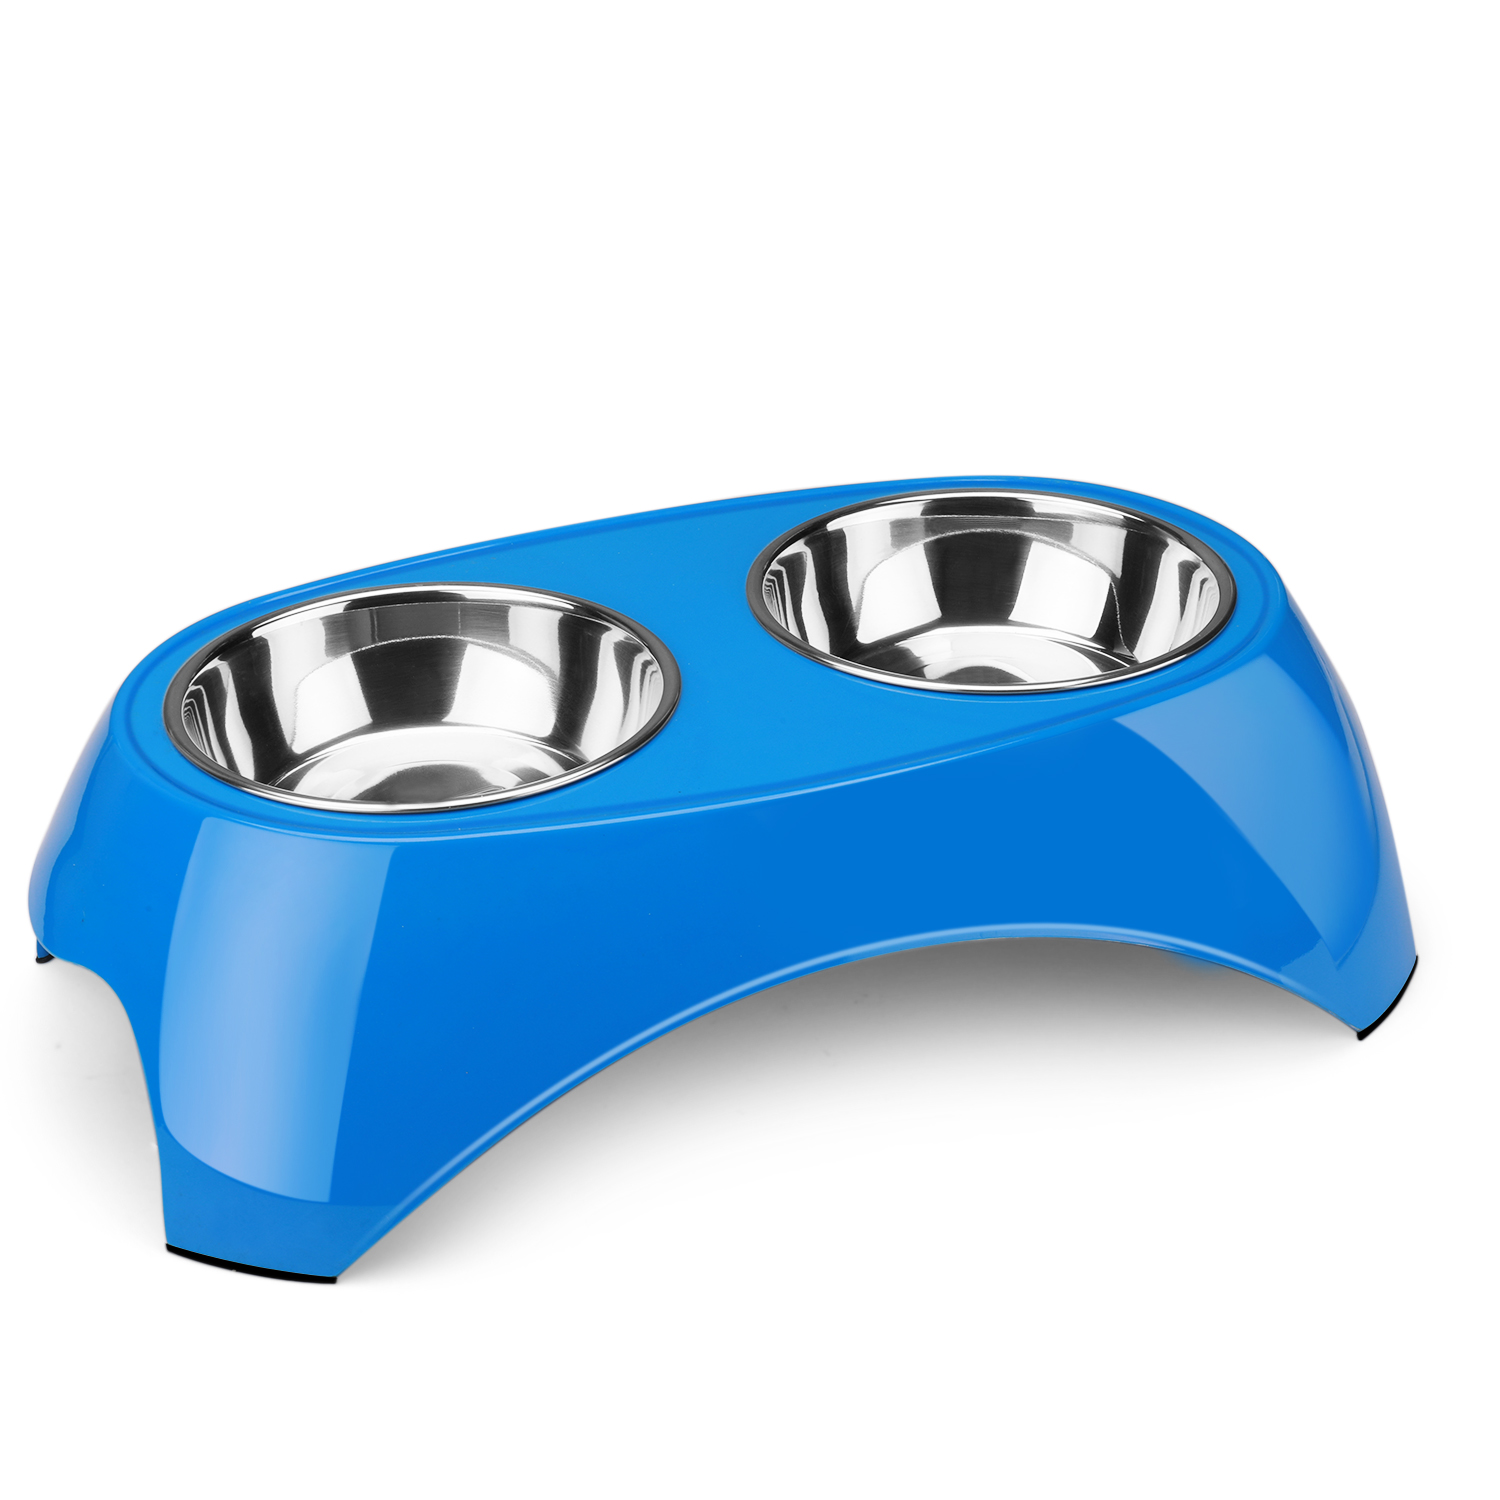 Flexzion Pet Feeder Stainless Steel Dog Bowl Set of 2 - Feeding Station Tray with Removable Food Water Holder, Rubber Slip Resistant Base Stand, Dis